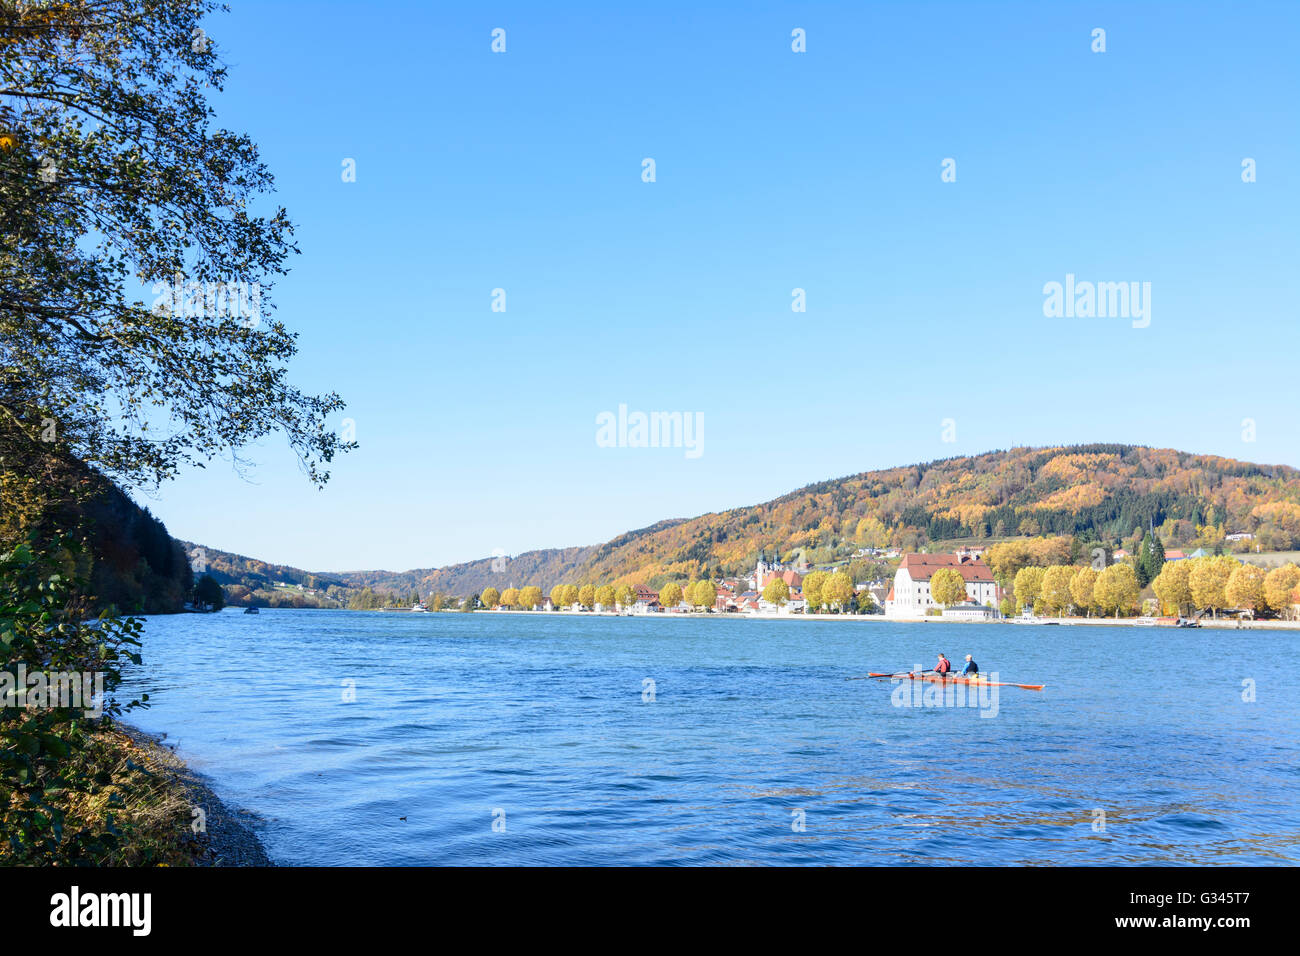 Danube , Castle and City Obernzell with Rowboat, Germany, Bayern, Bavaria, Niederbayern, Lower Bavaria, Obernzell Stock Photo